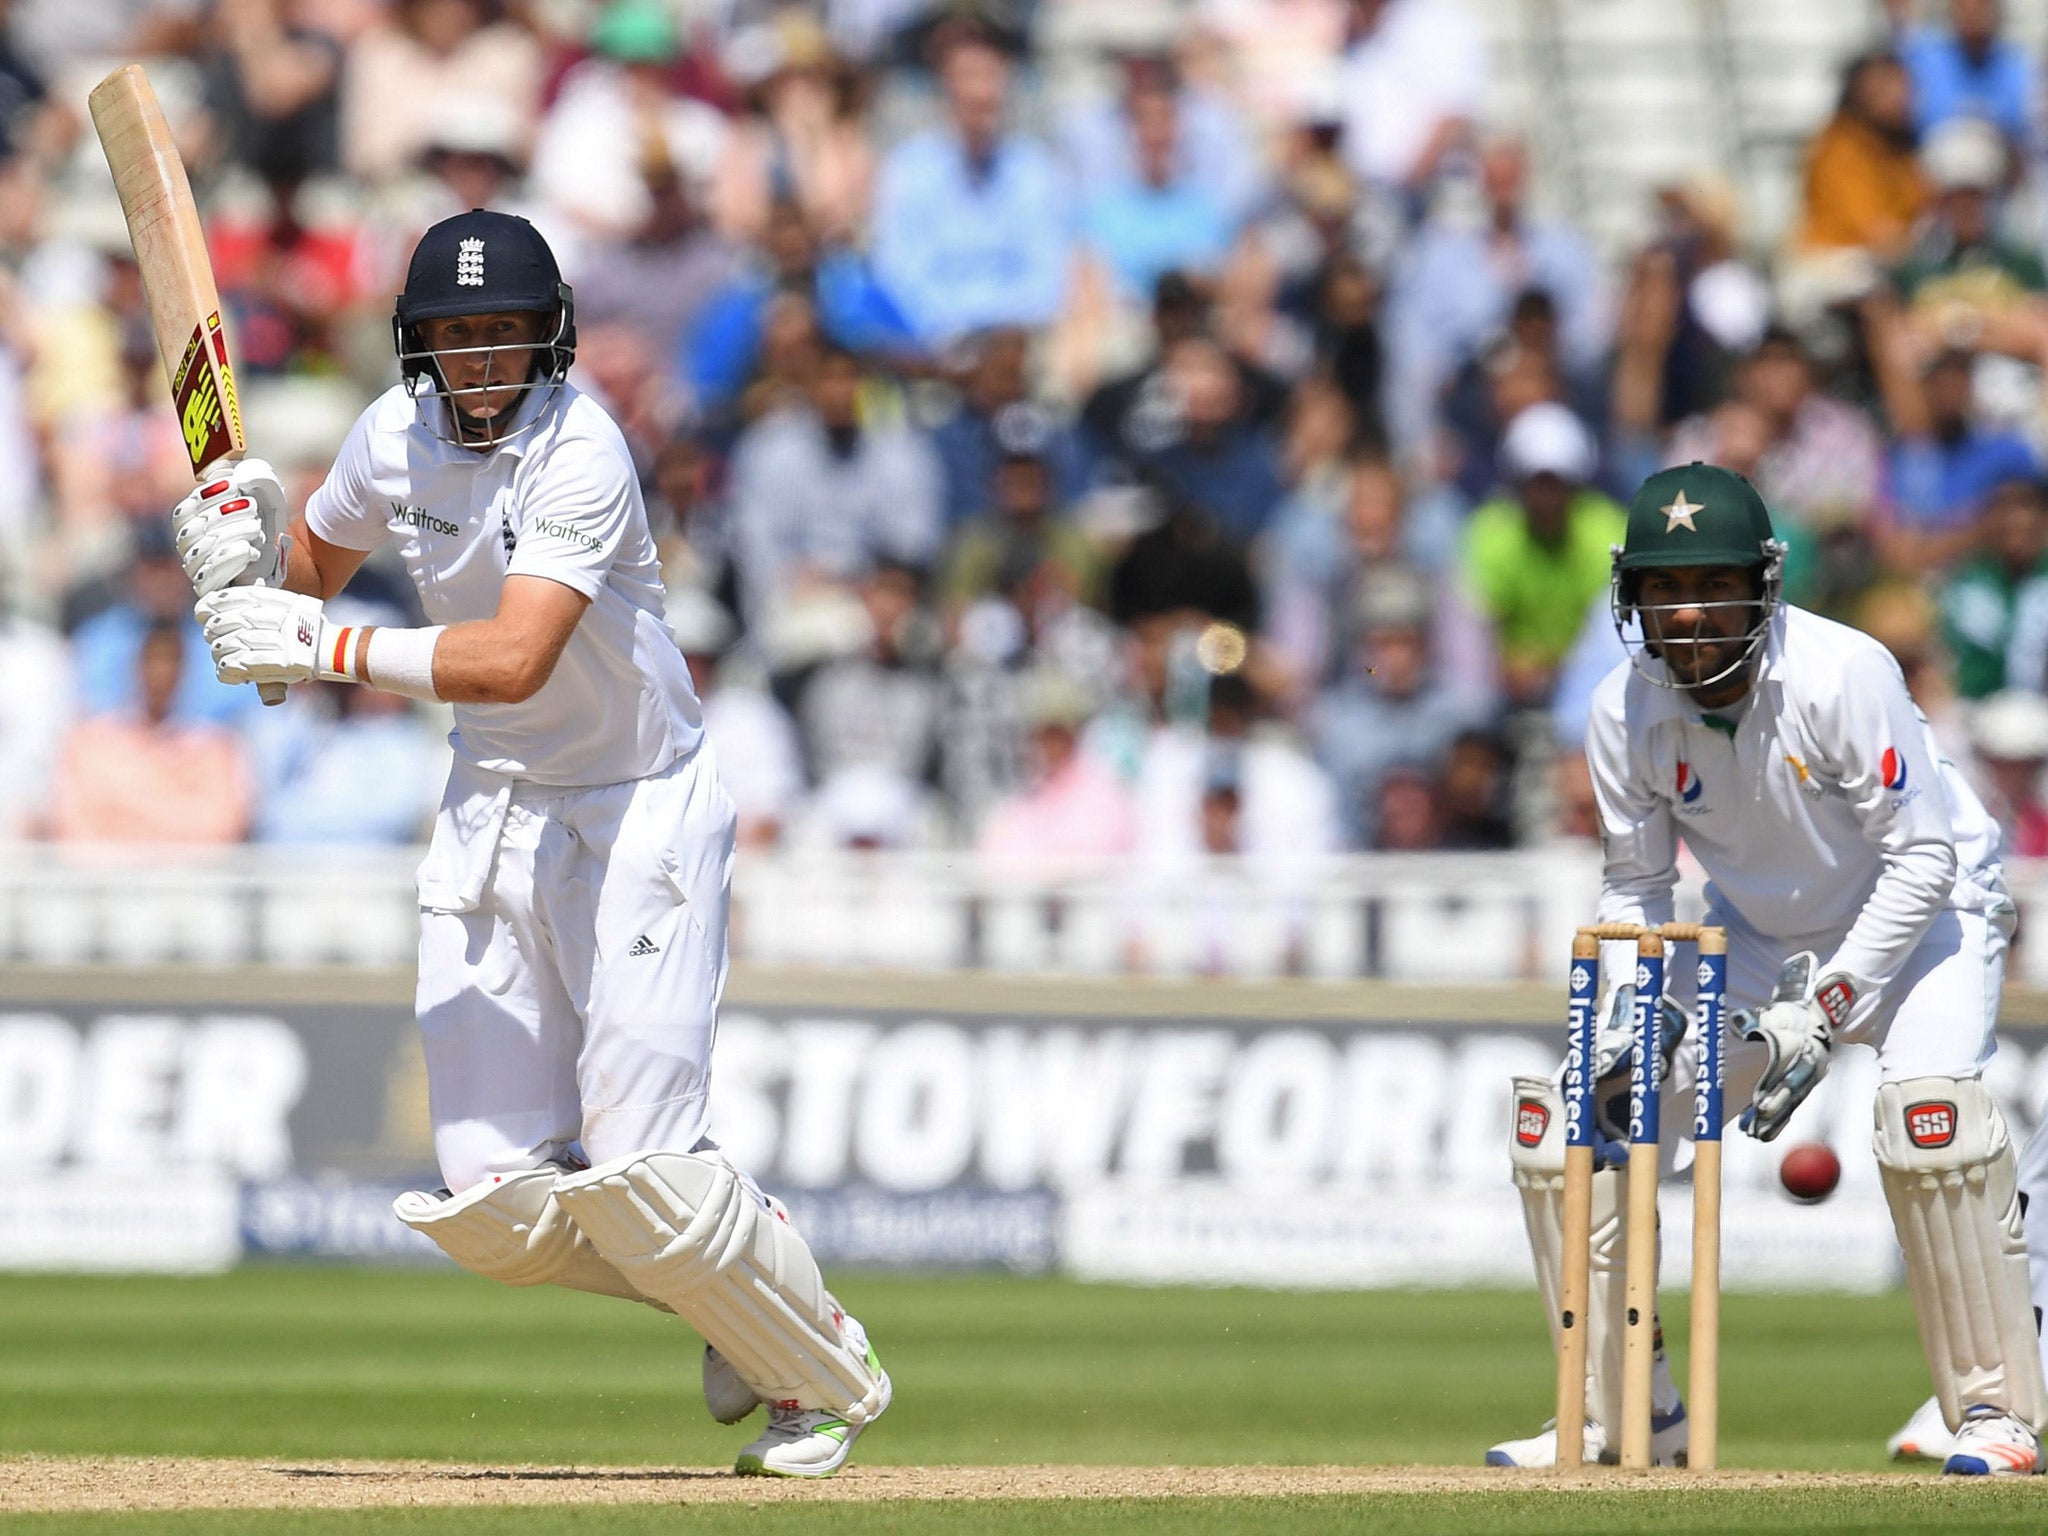 Joe Root steered England to an 80-run lead at lunch